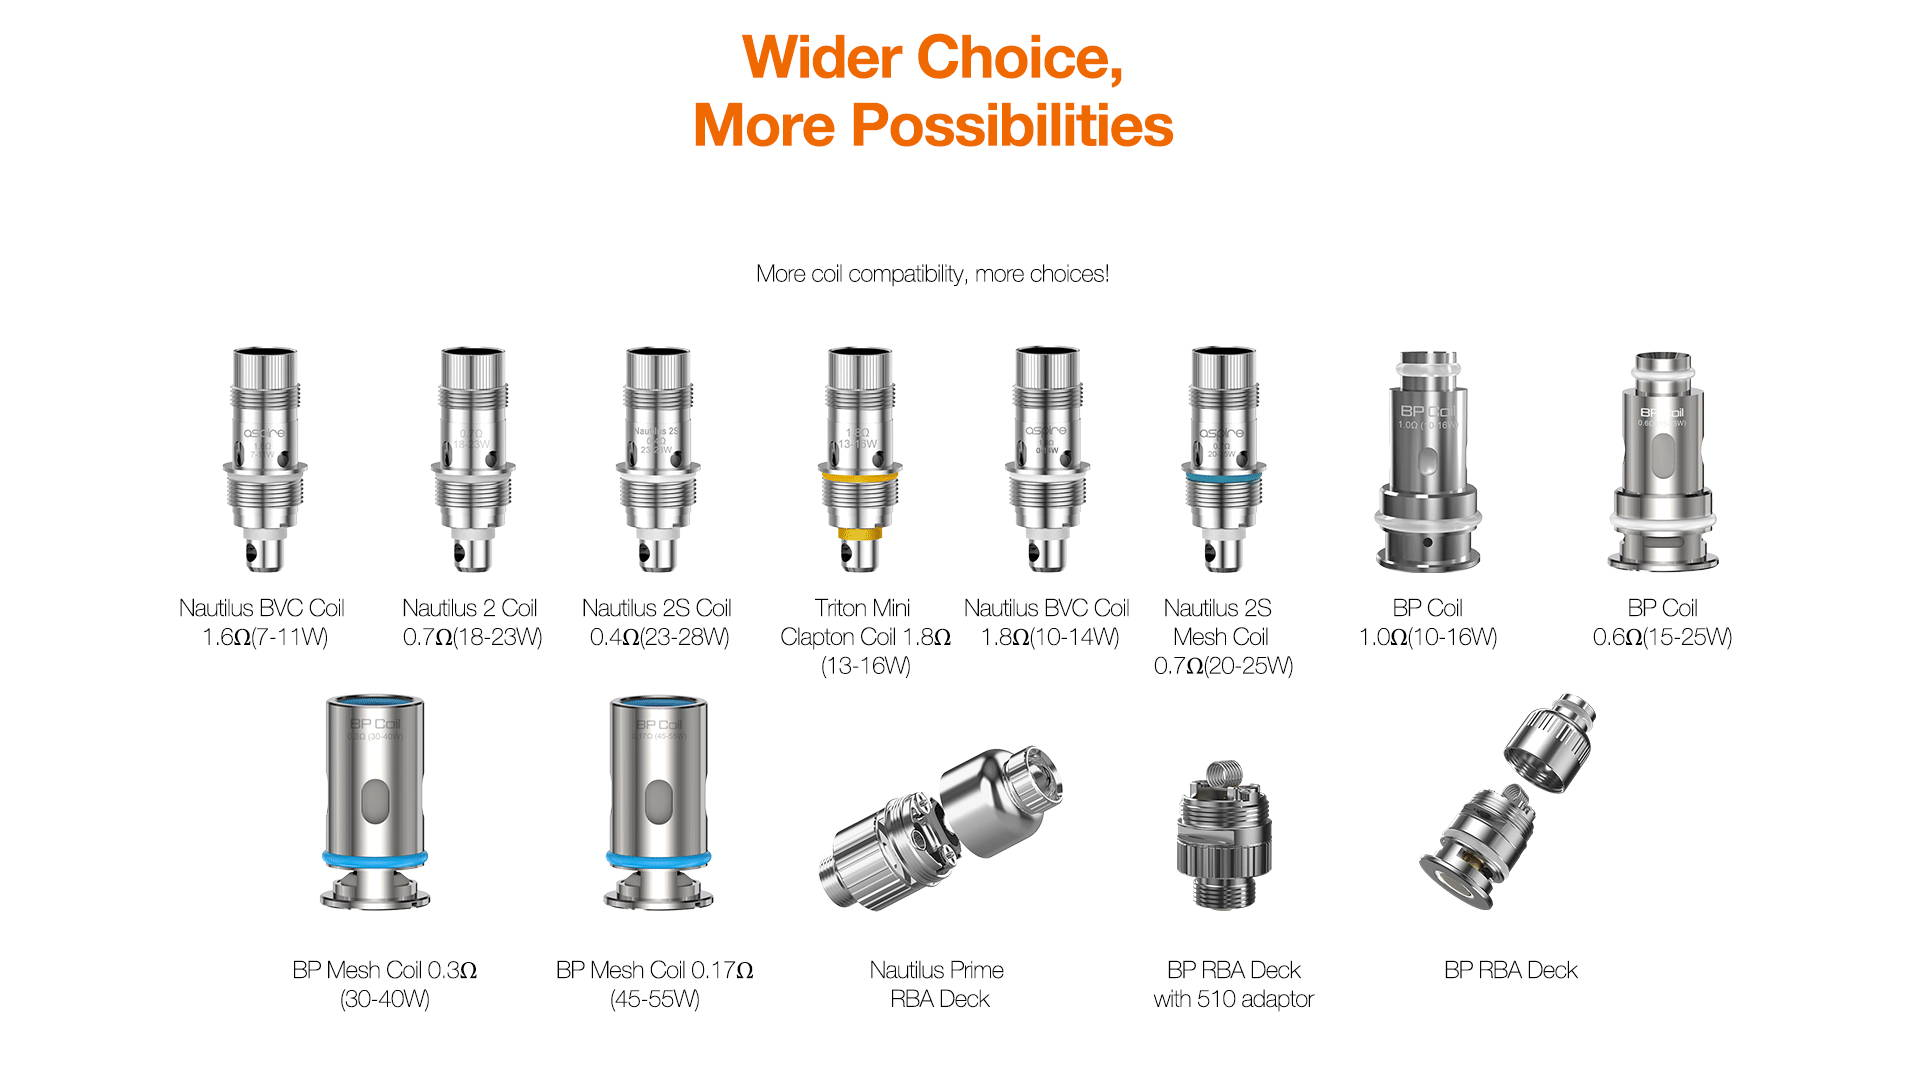 Wider Choice, More Entertainment  More coils compatibility, more choices! Better still, more accessories will be coming soon.